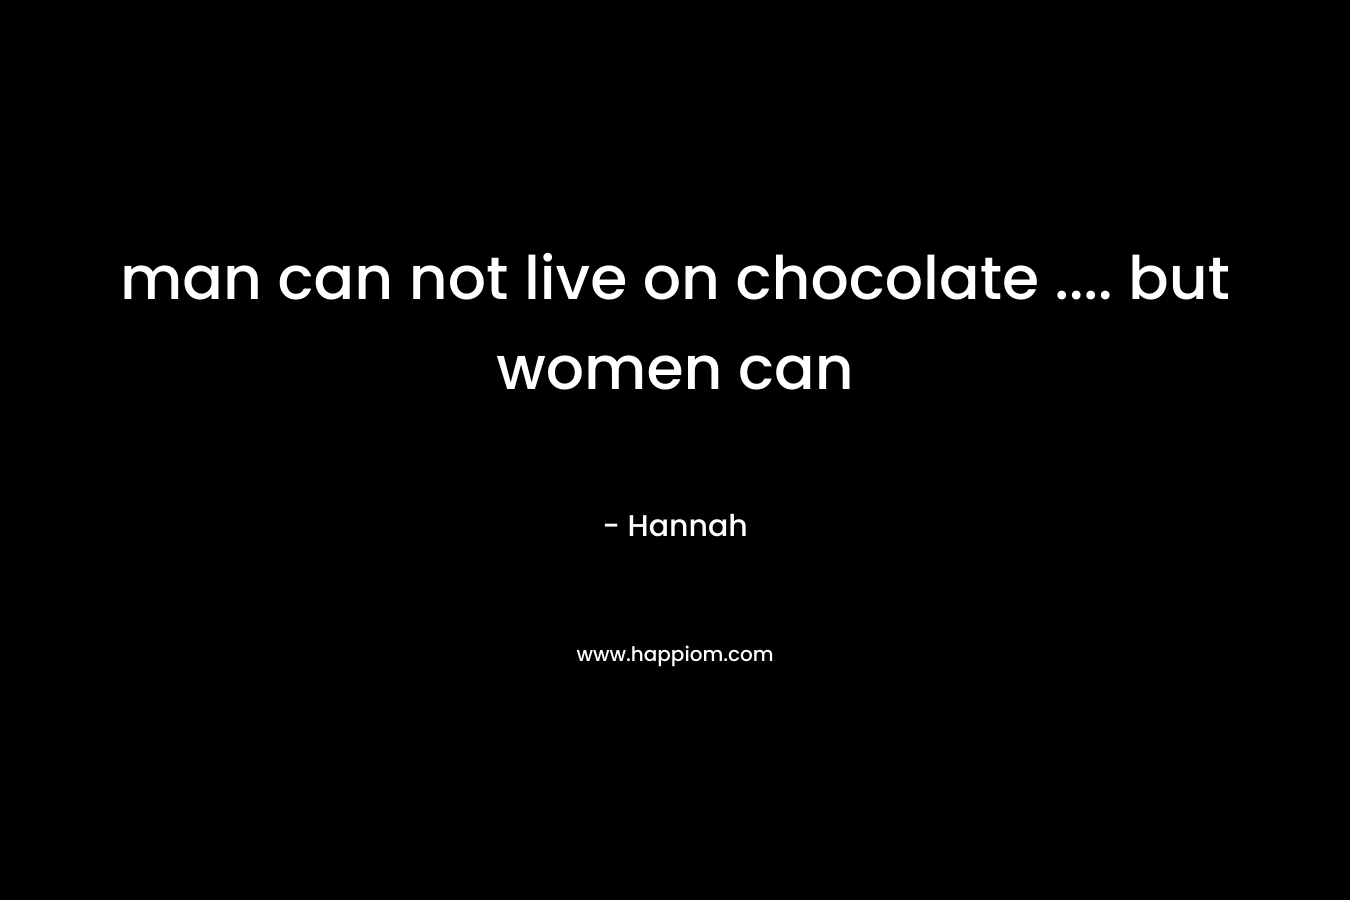 man can not live on chocolate .... but women can